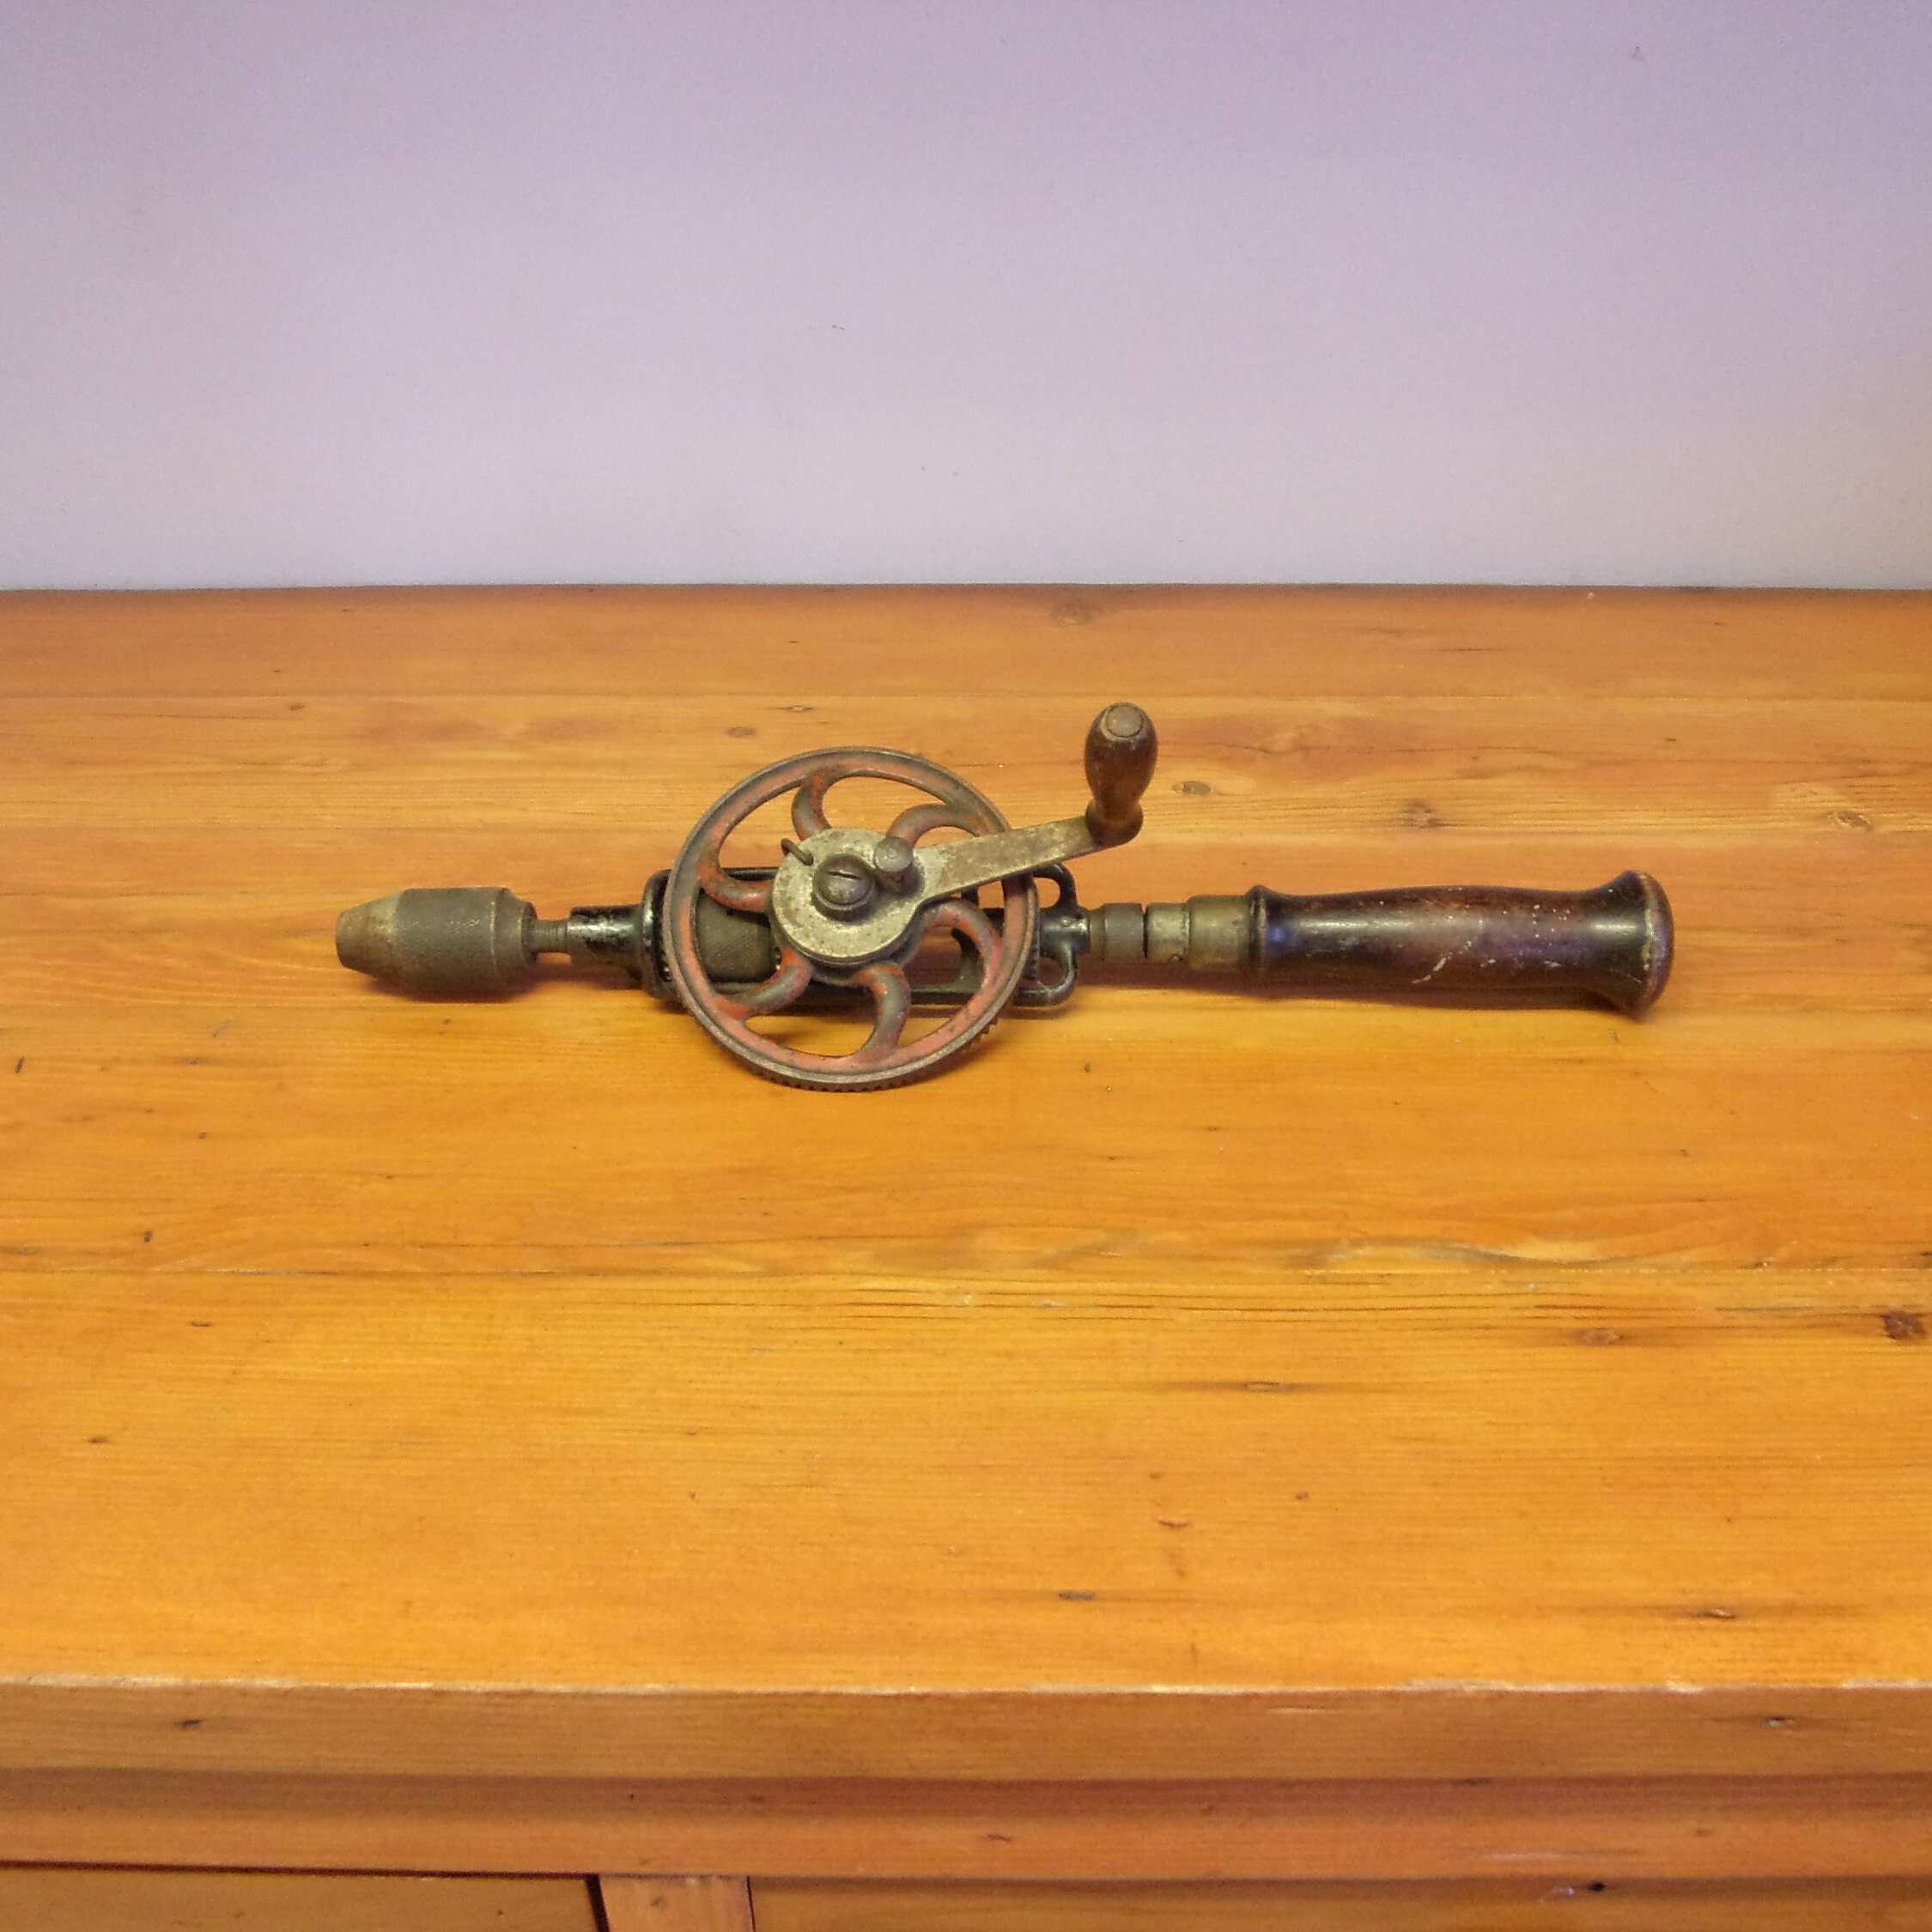 Vintage Squire Egg Beater Hand Drill, Wood Handles 